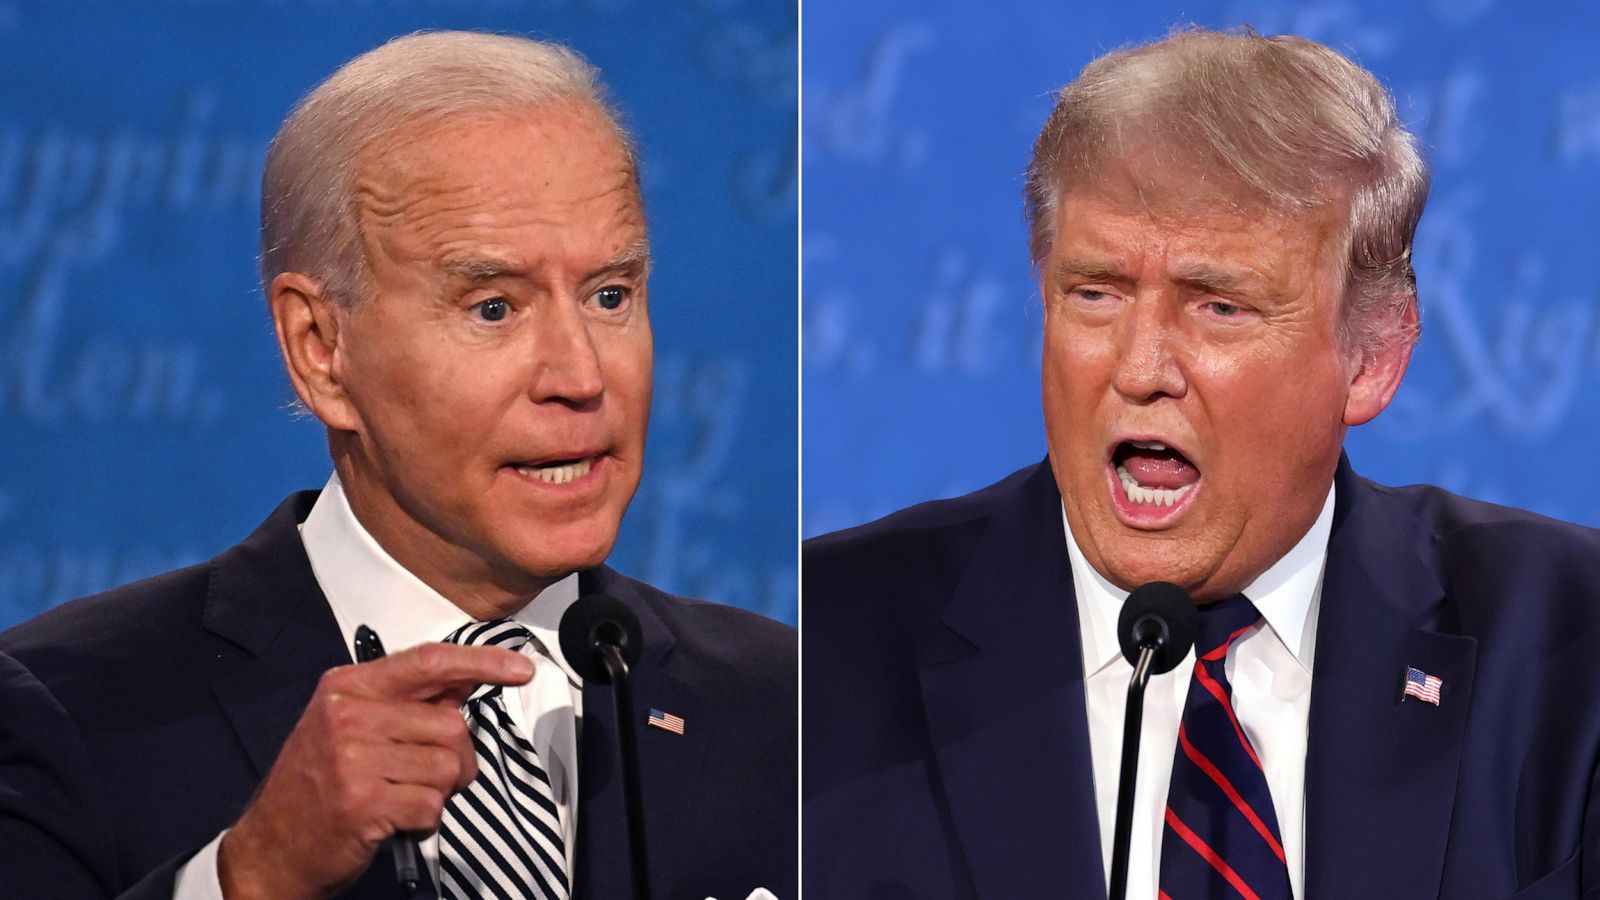 Trump and Biden show own vulnerabilities in a messy argument that was barely a debate: ANALYSIS